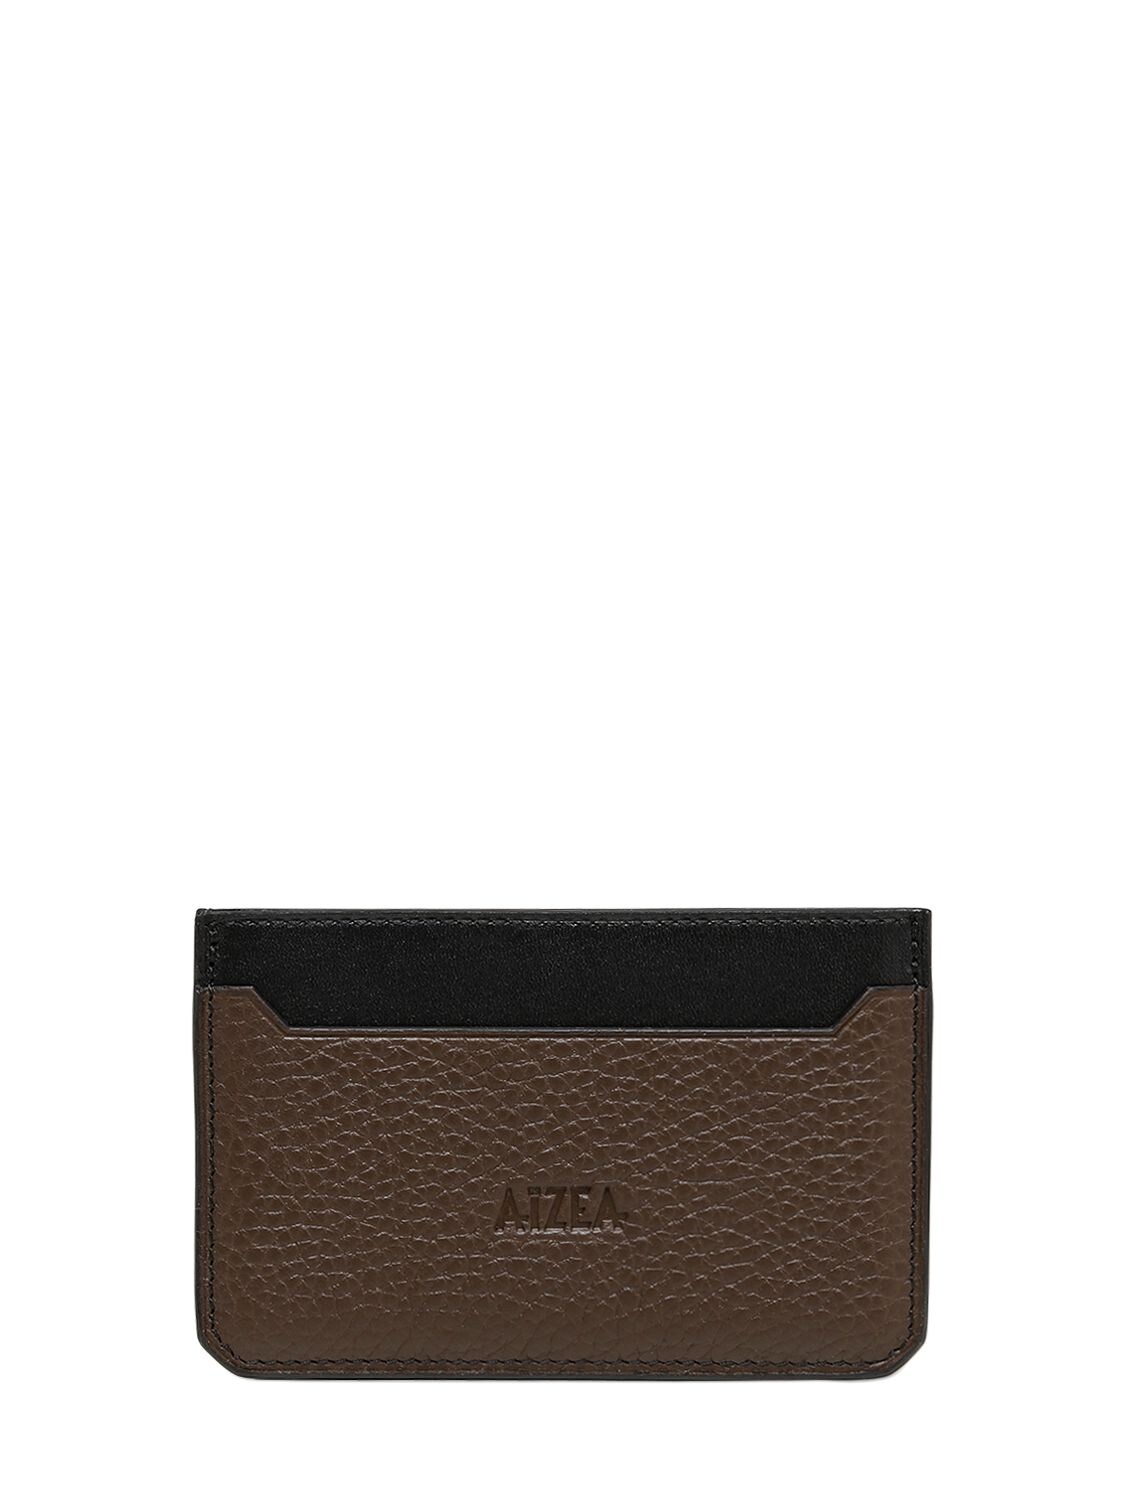 Aizea Soft Leather Card Holder In Brown